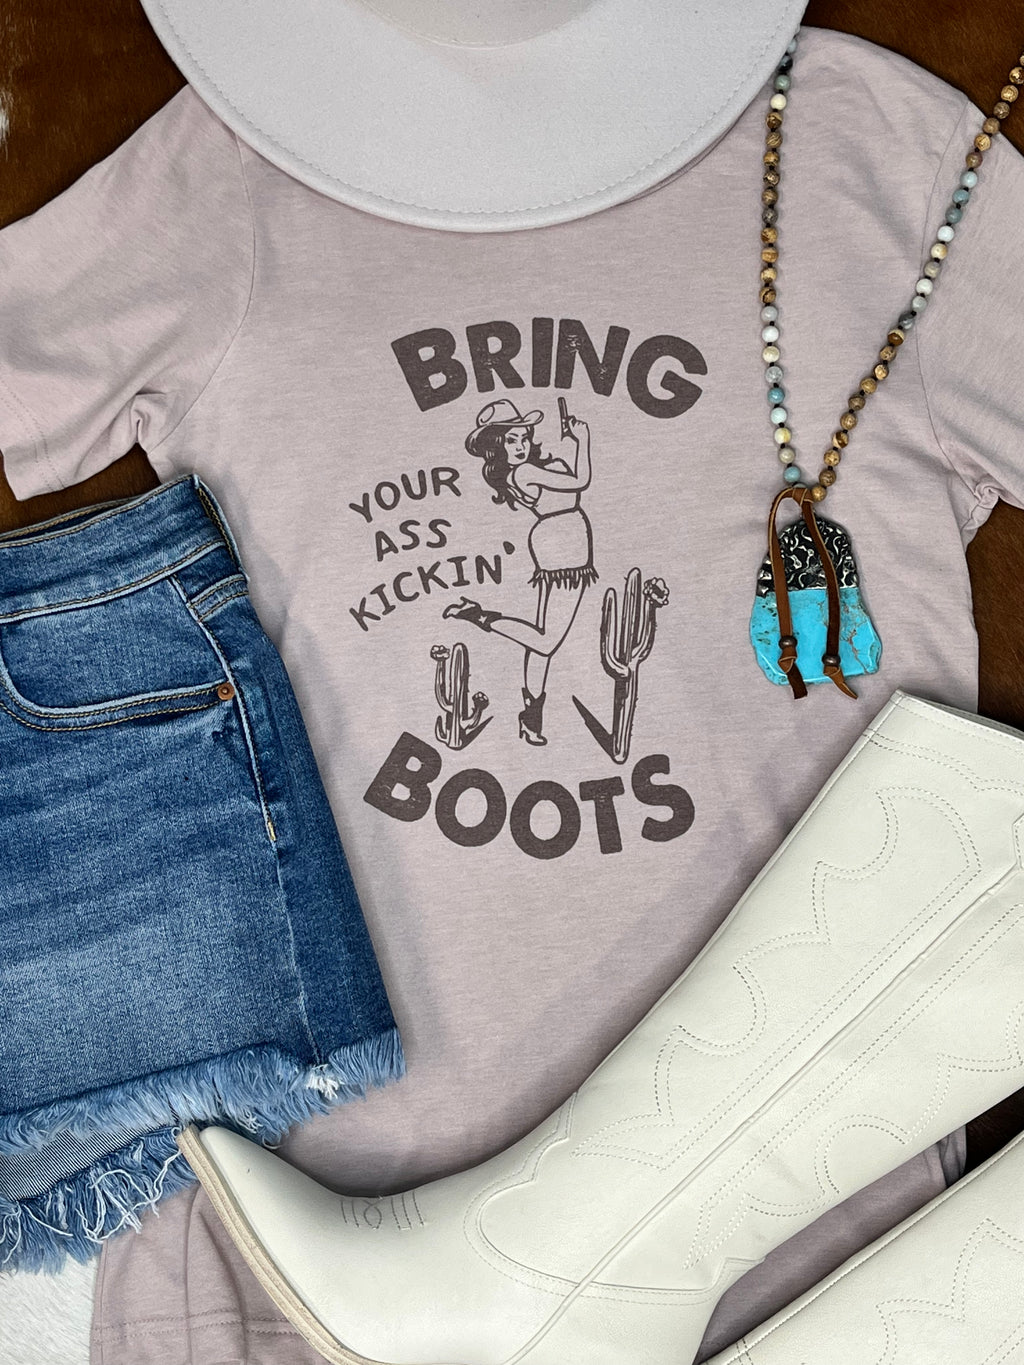 Bring Your Ass Kicking Boots Tee